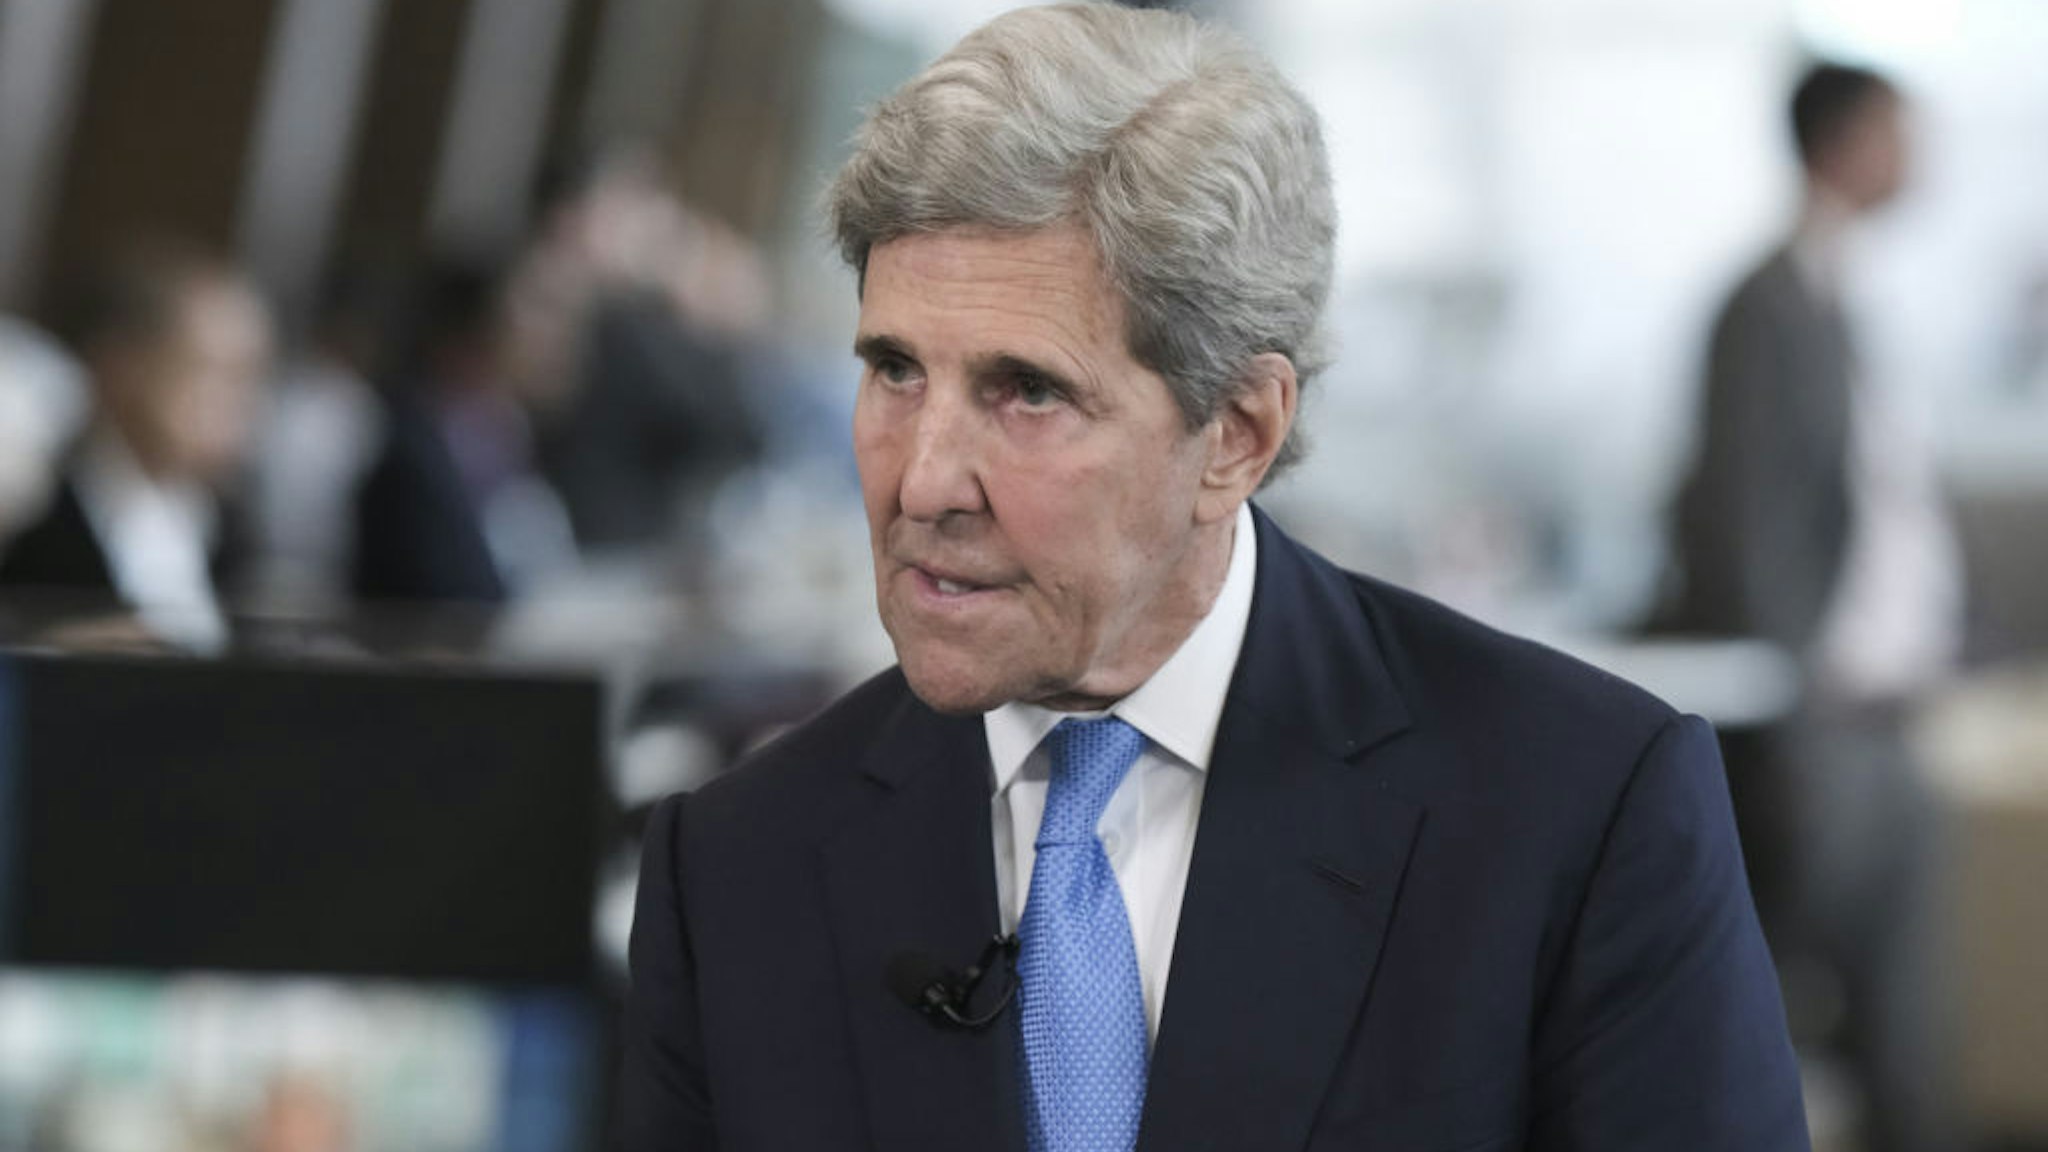 John Kerry, US special presidential envoy for climate, during a Bloomberg Television interview at the 2023 CERAWeek by S&amp;P Global conference in Houston, Texas, US, on Tuesday, March 7, 2023. The global energy industry is facing a welter of uncertainty and change -- driven by the effects of the global pandemic; shifting geopolitics and a war launched by one of the world's major energy powers; high energy prices; supply chain and infrastructure constraints; and economic instability.